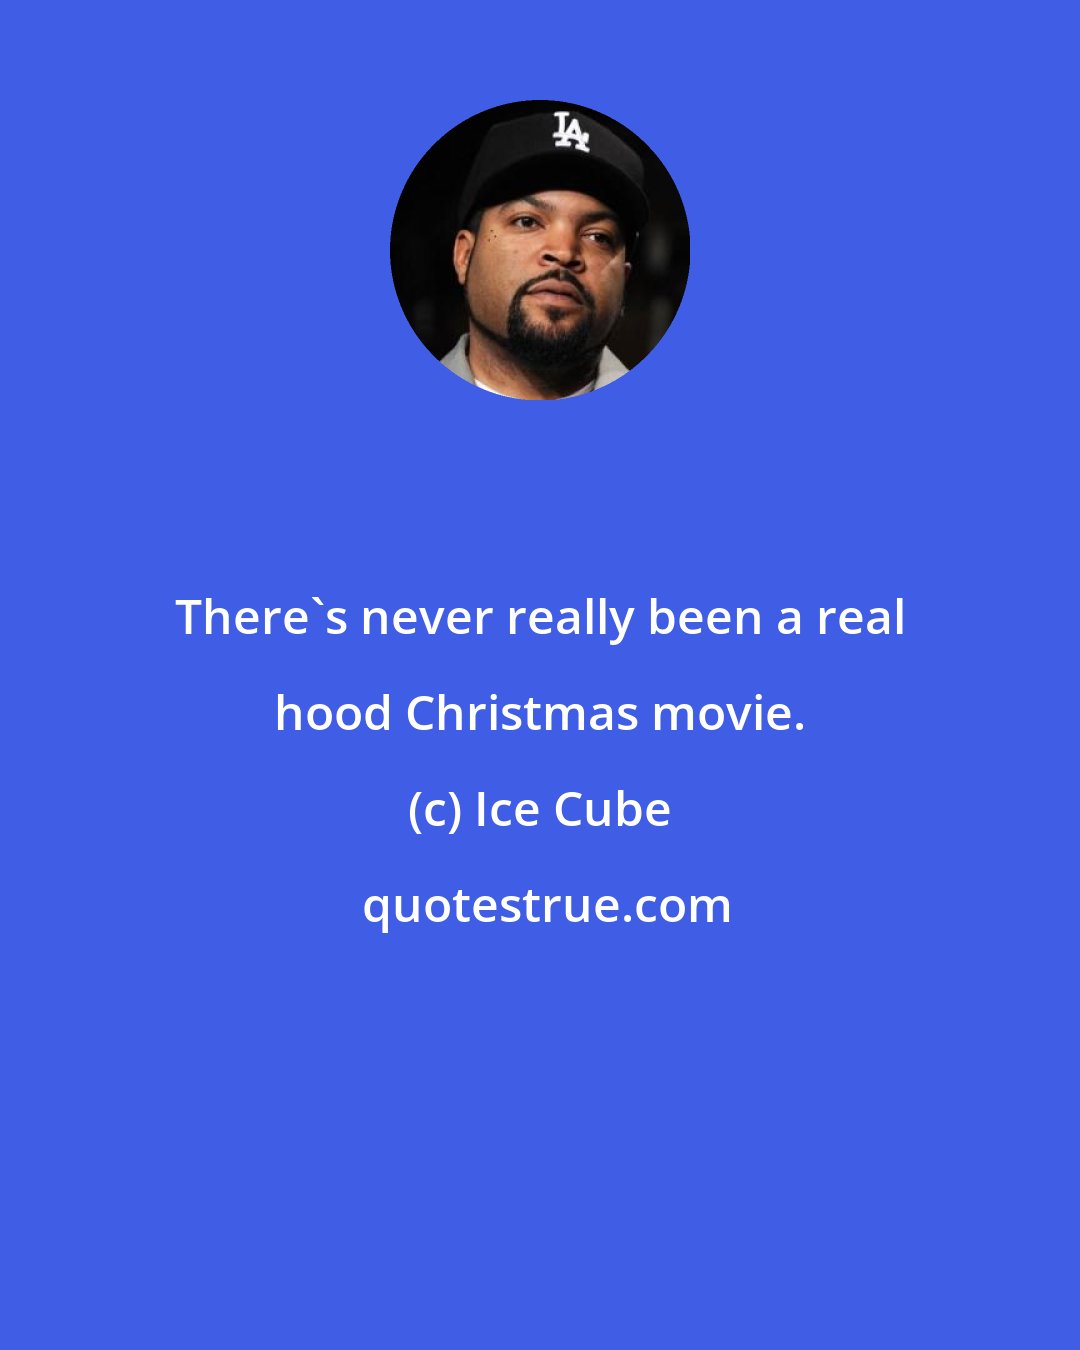 Ice Cube: There's never really been a real hood Christmas movie.